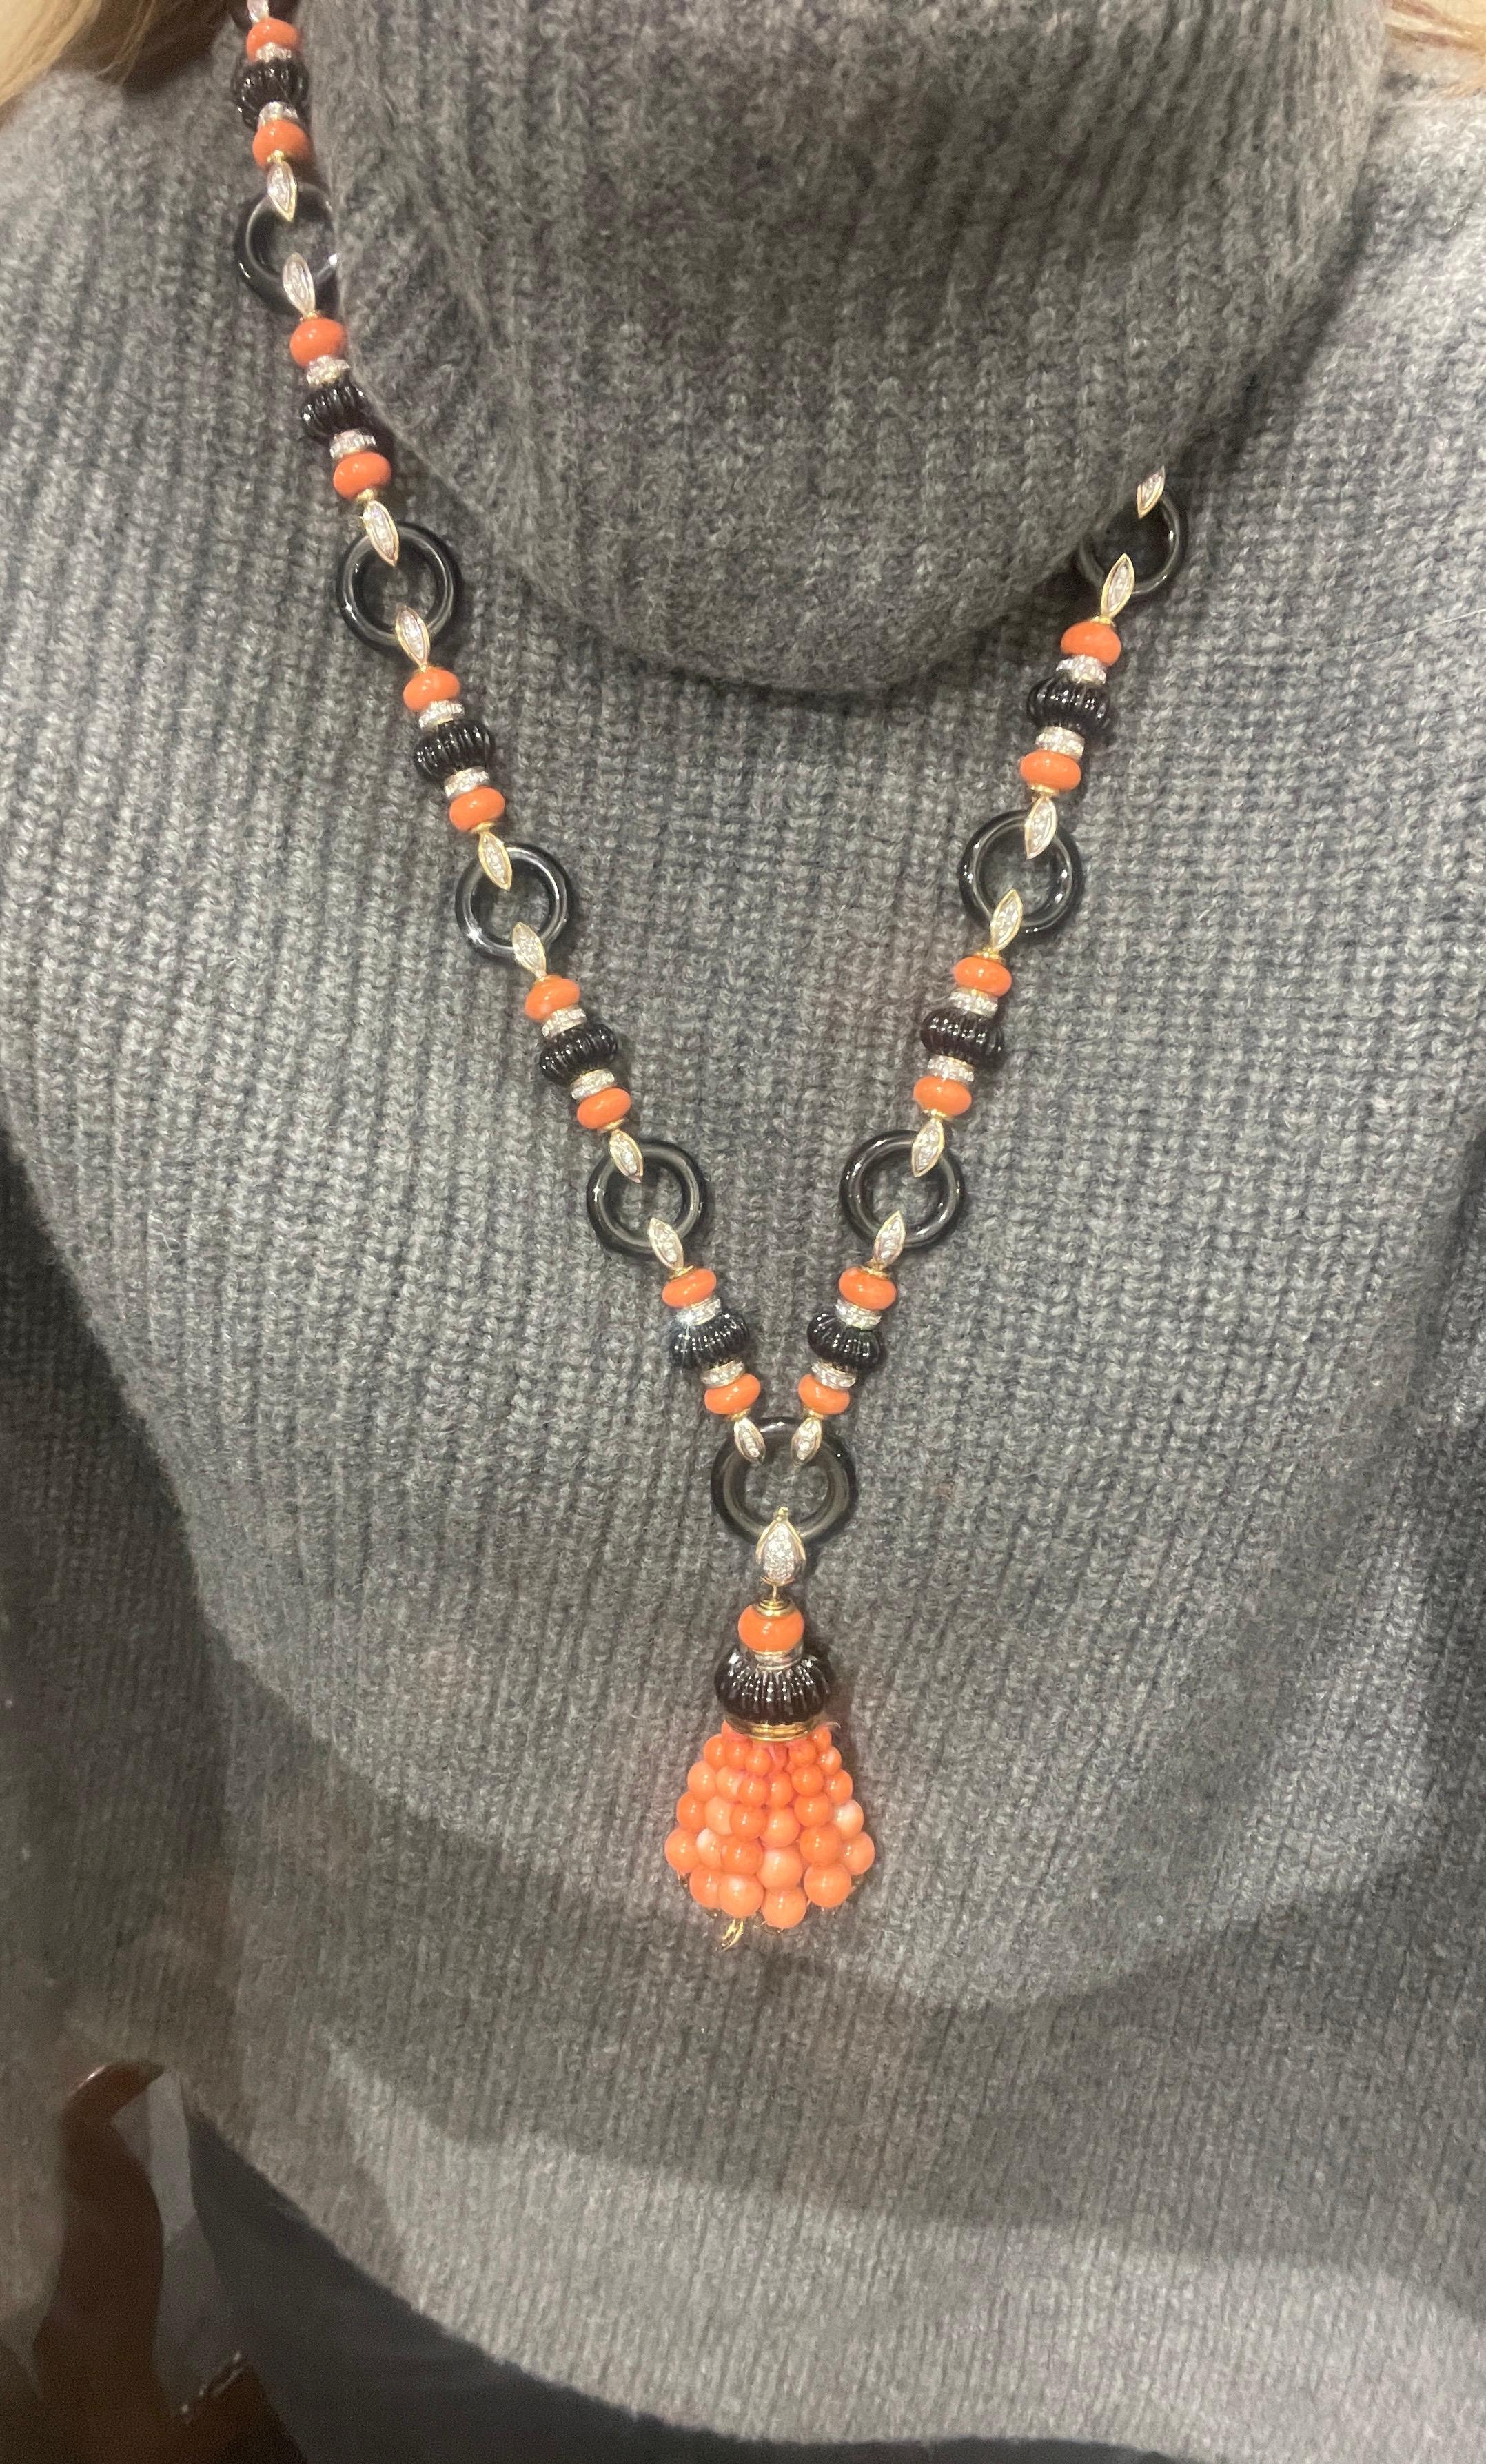 Stunning one of a kind onyx coral and diamond necklace with removable tassel. Accented with approximately 5 cttw of G/VS diamonds in 14kt yellow gold. This is the perfect show stopper necklace for all occasions.